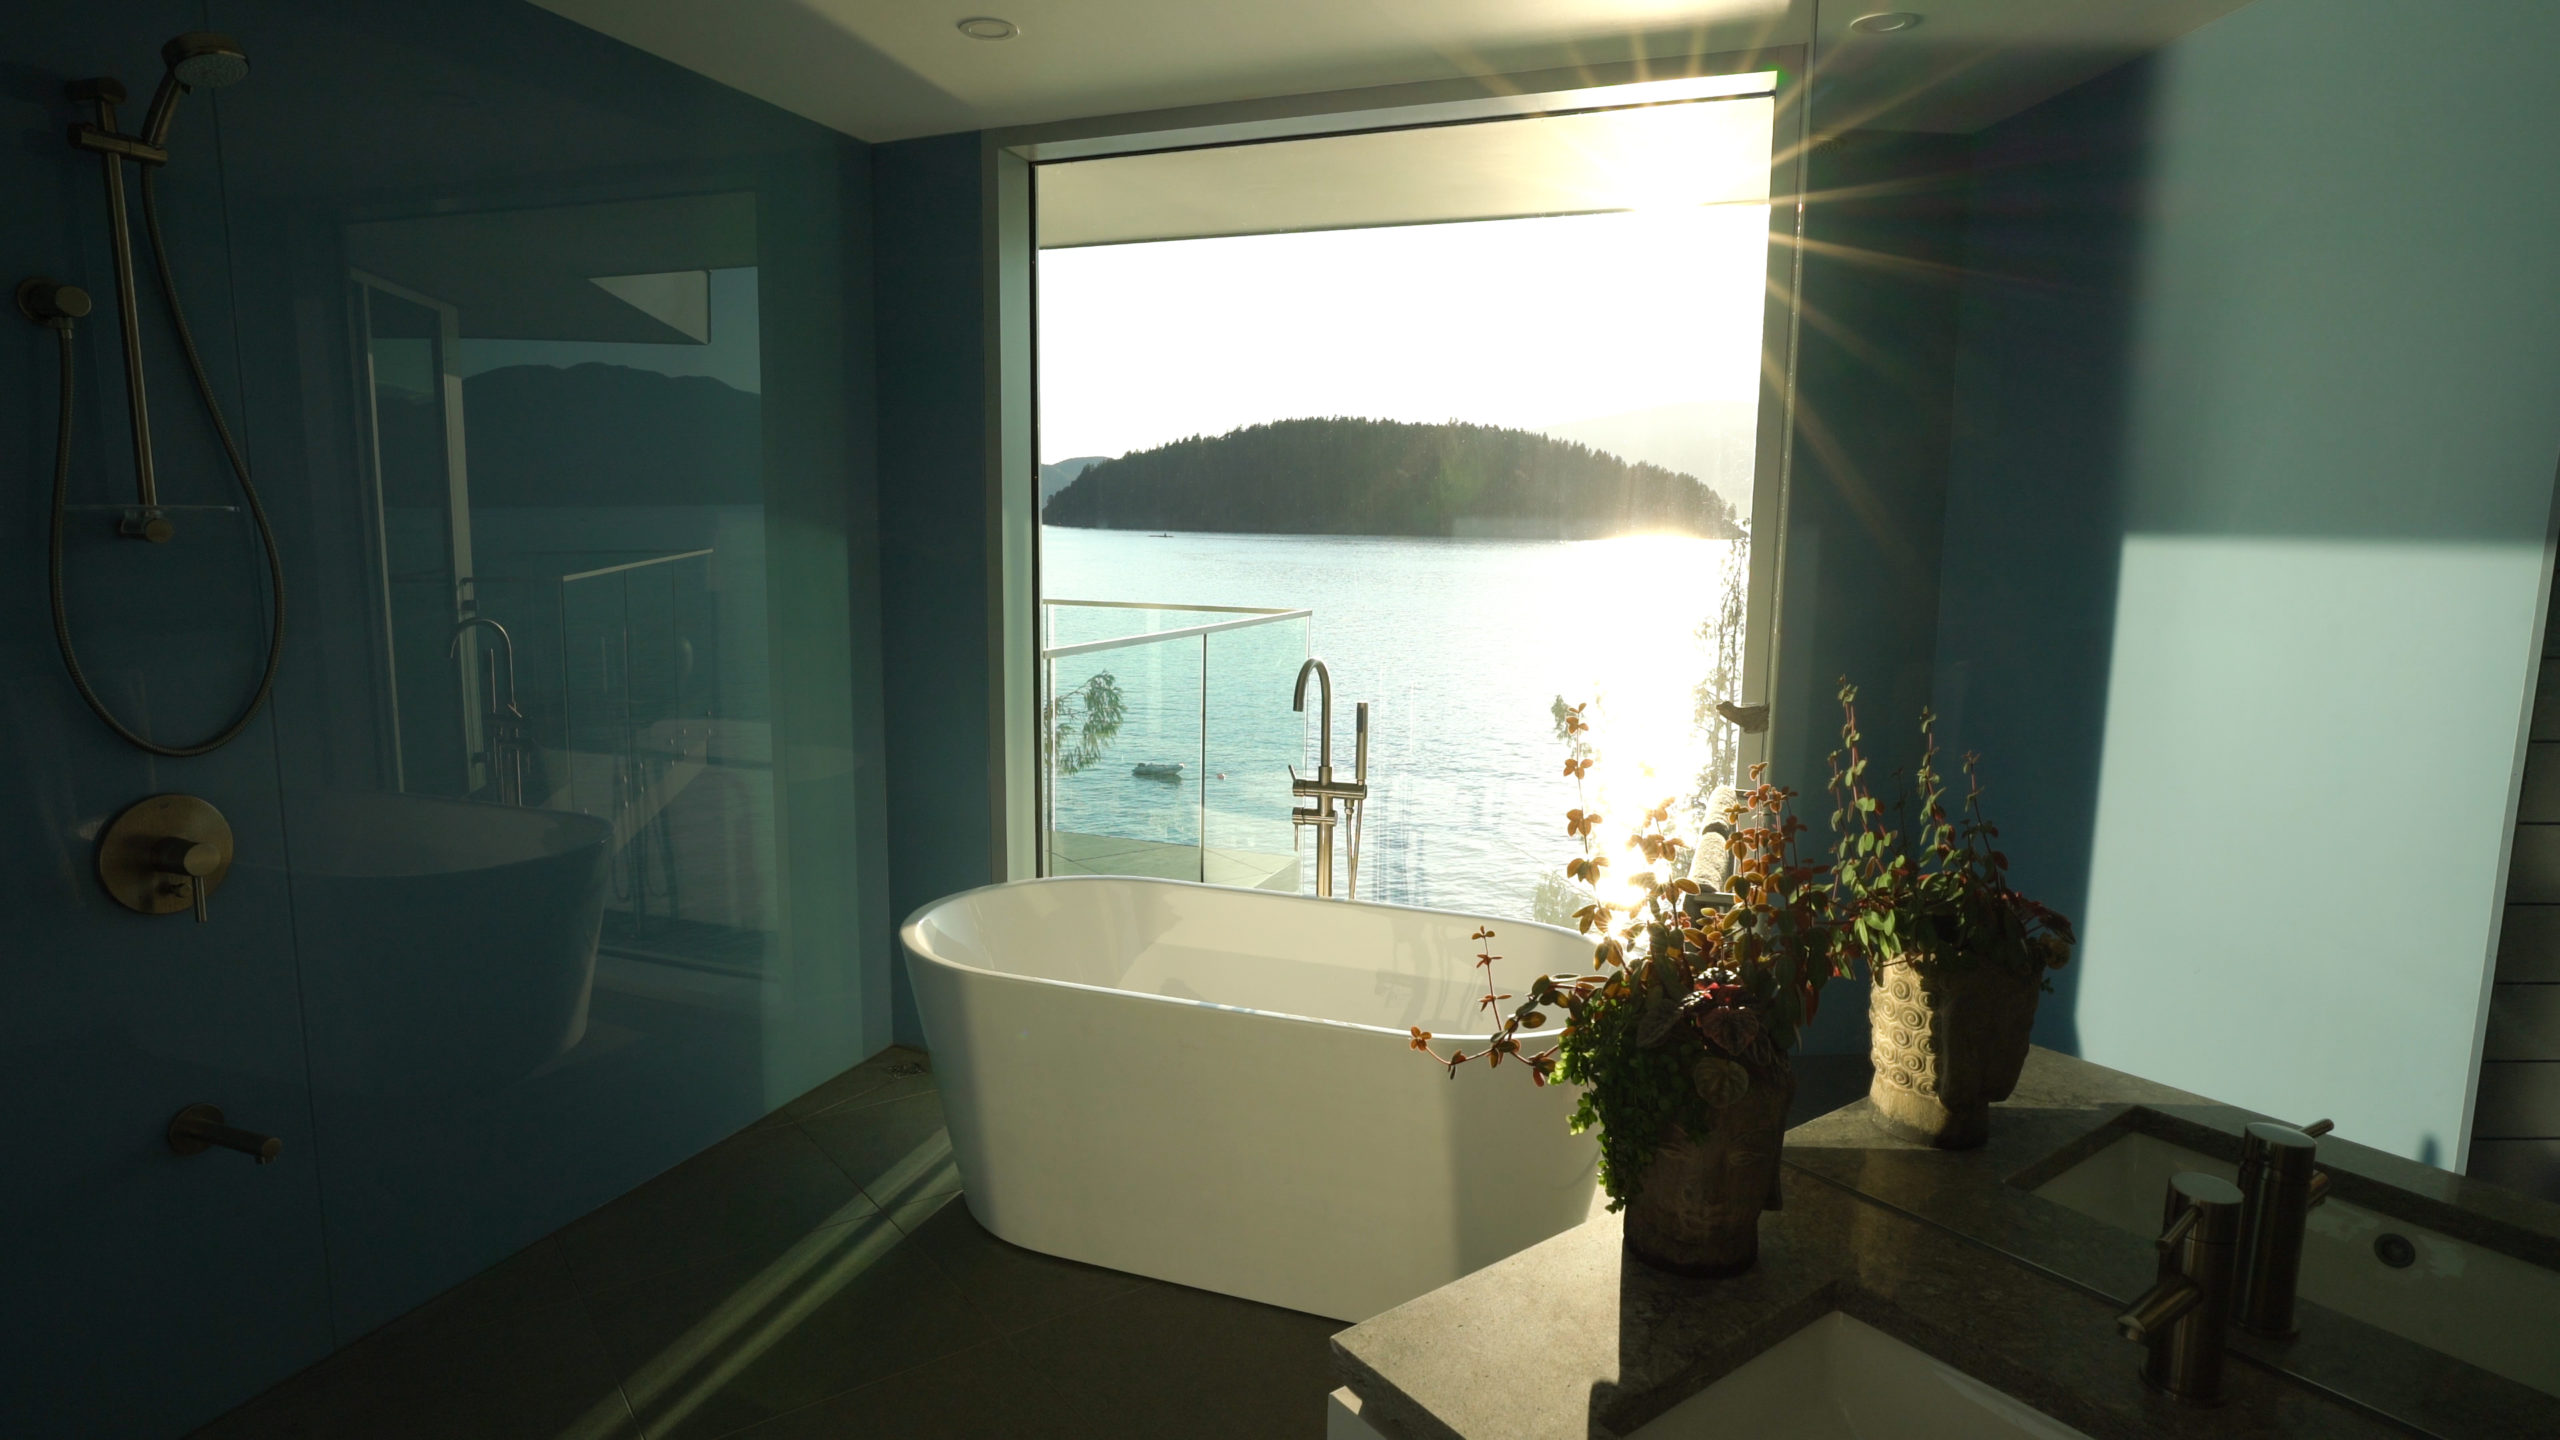 Shower and bathtub with an ocean view in a luxurious custom residence on Bowen Island.